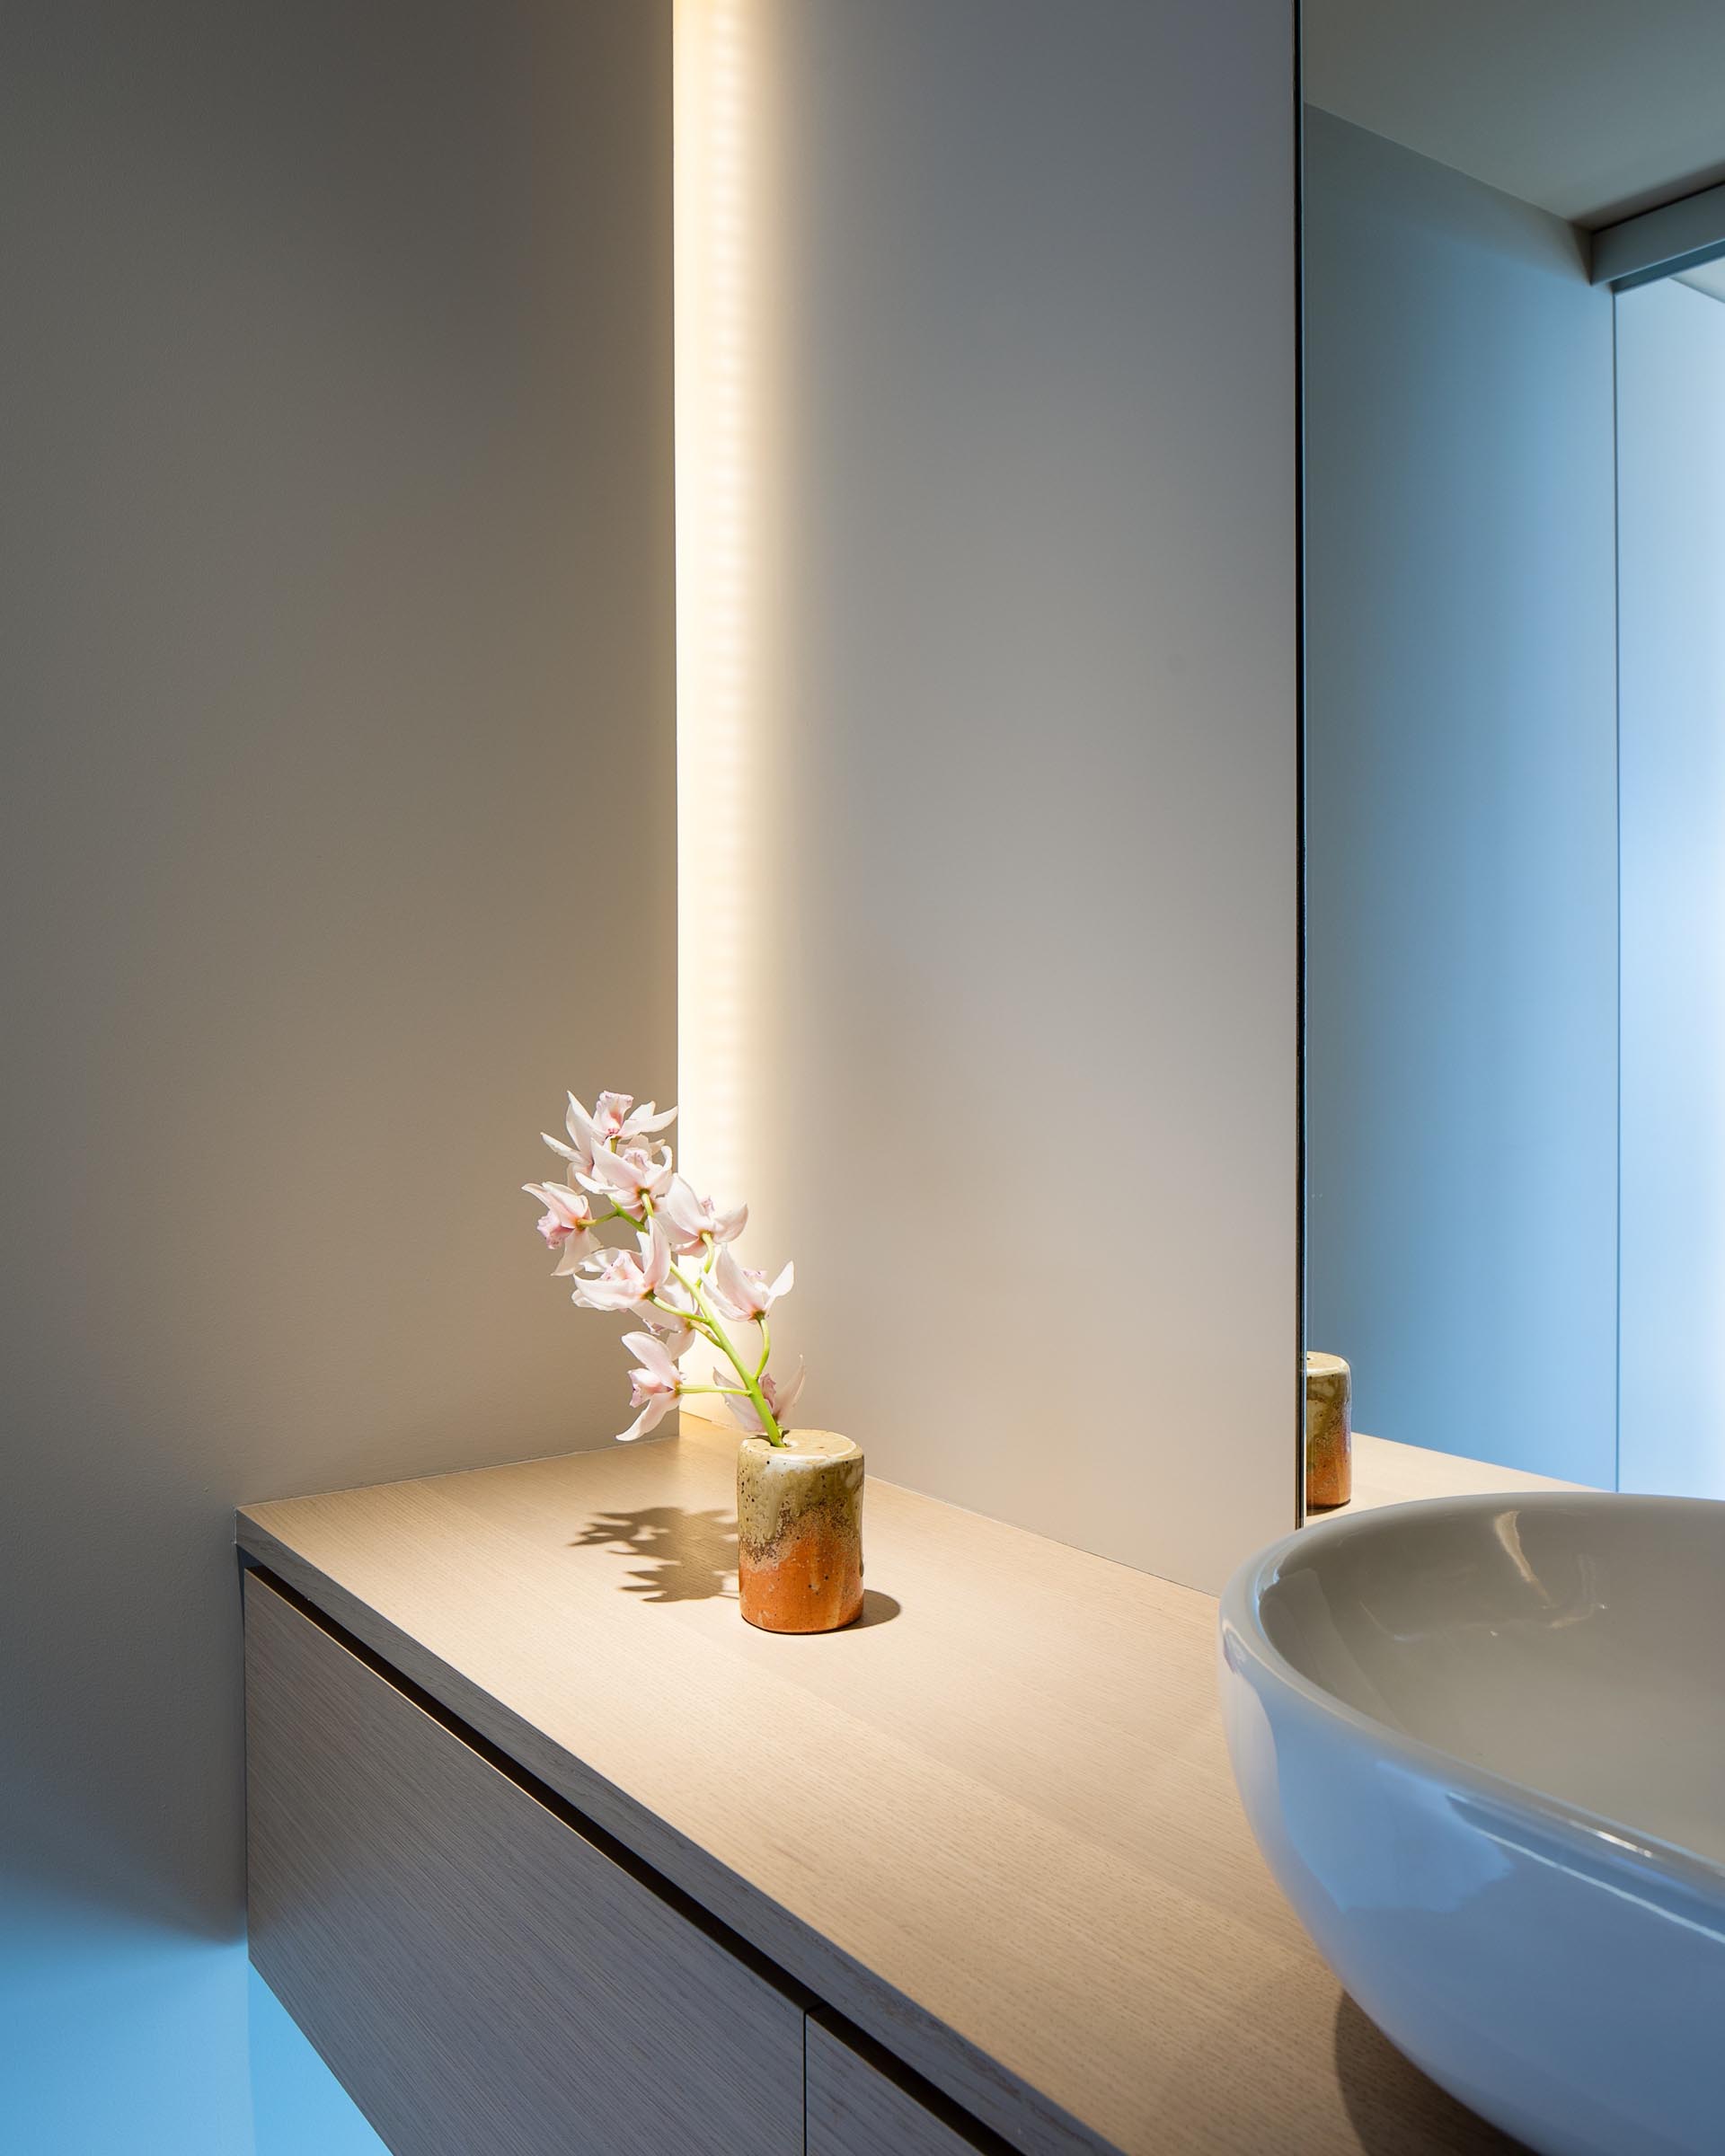 In this modern bathroom, there's a floating wood vanity with hidden lighting tucked away in the corner.